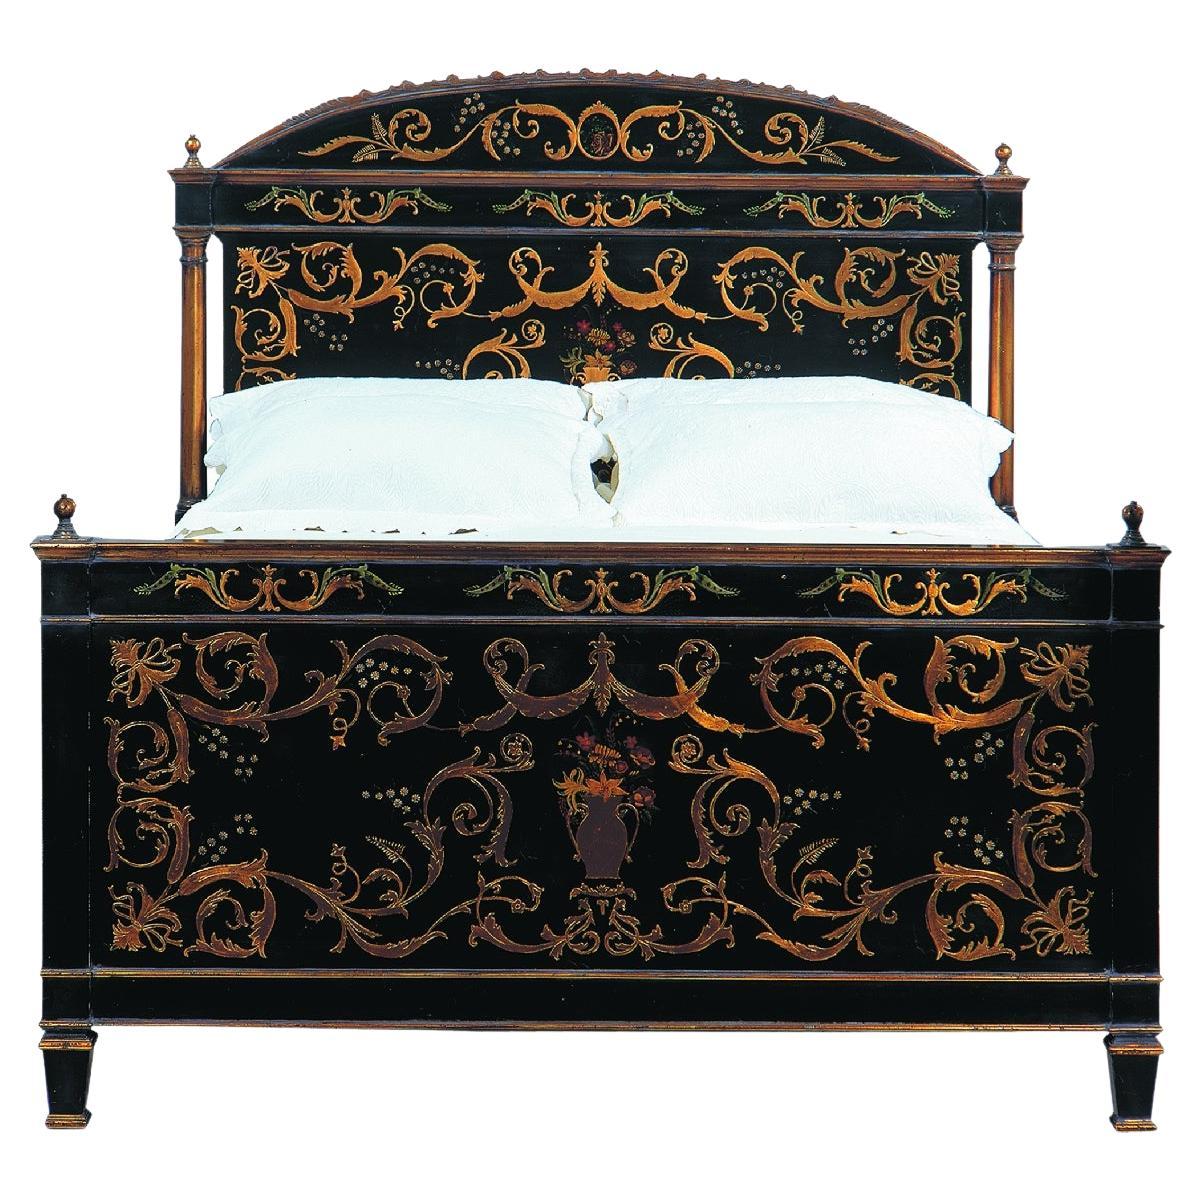 French with Italian Influence Style Hand-Painted Flandes Bed '60' For Sale